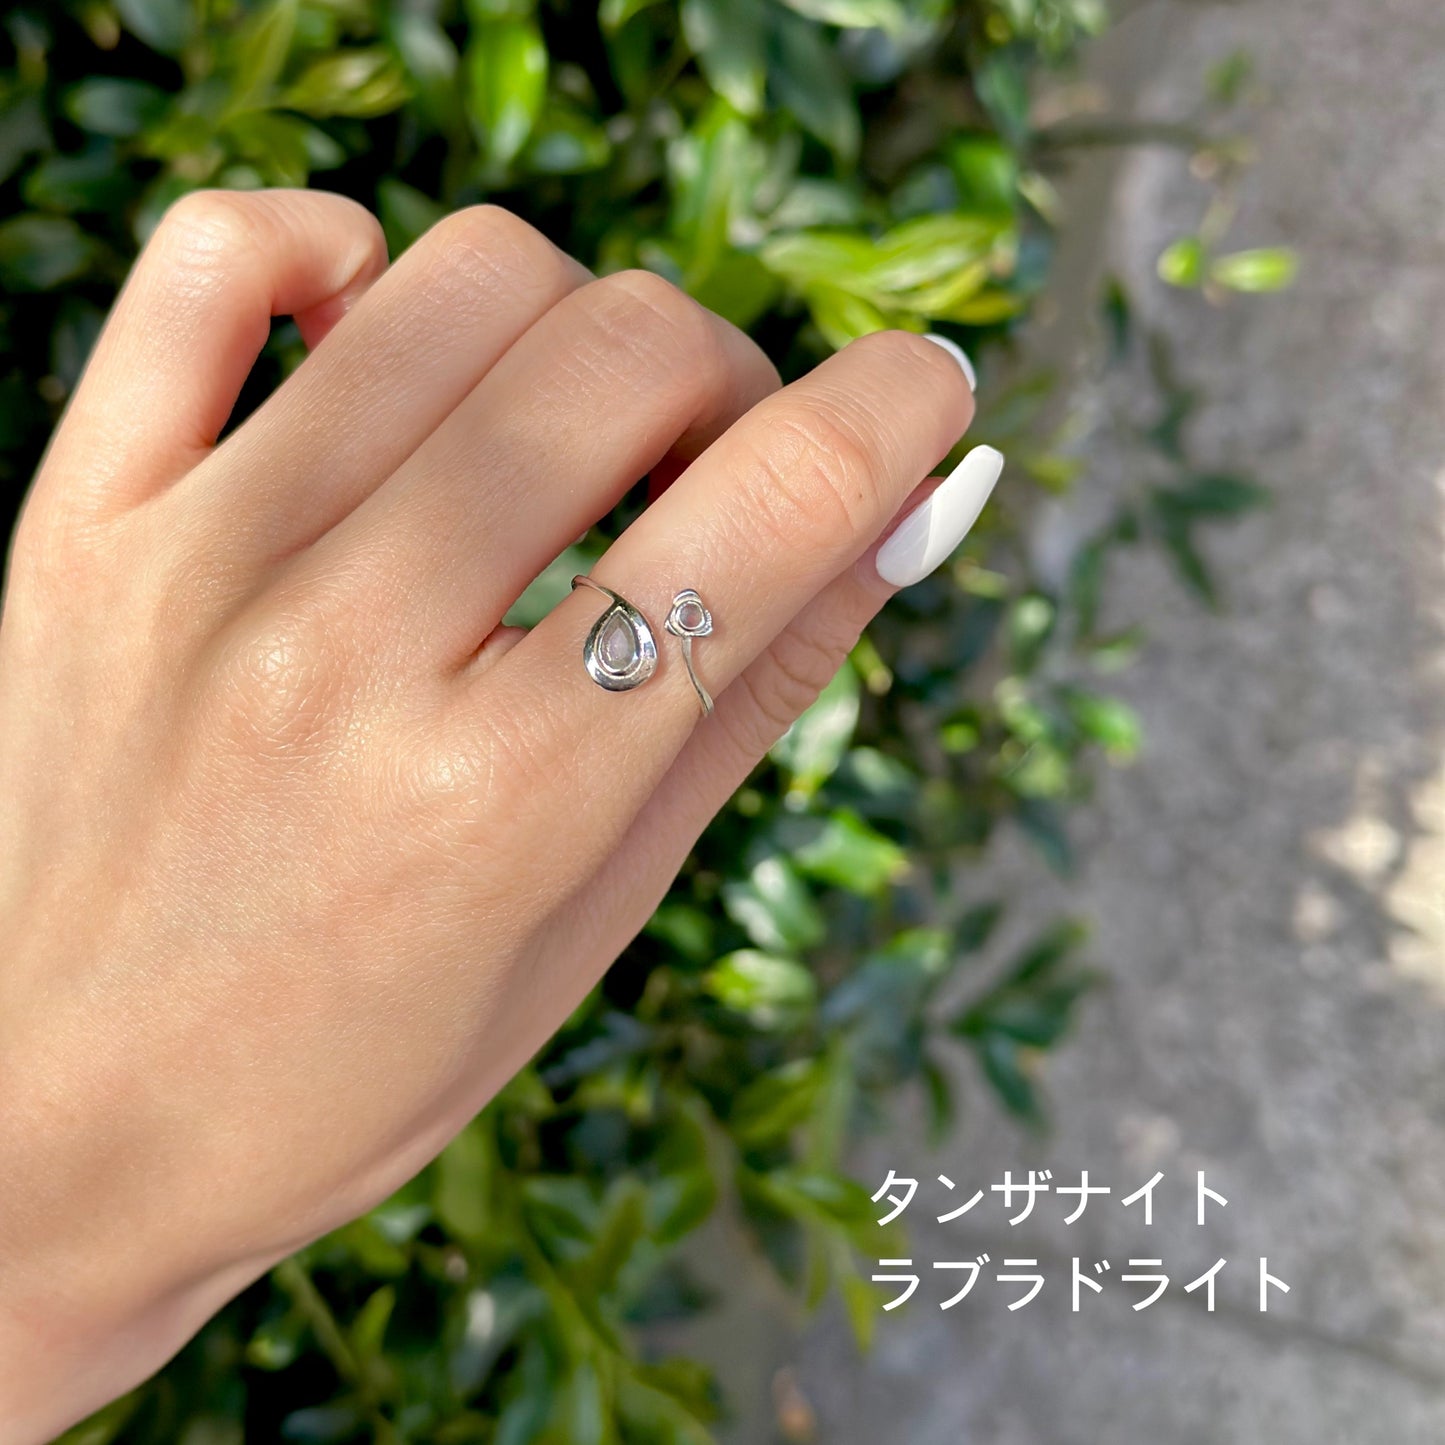 Silver925 2stone ring 3